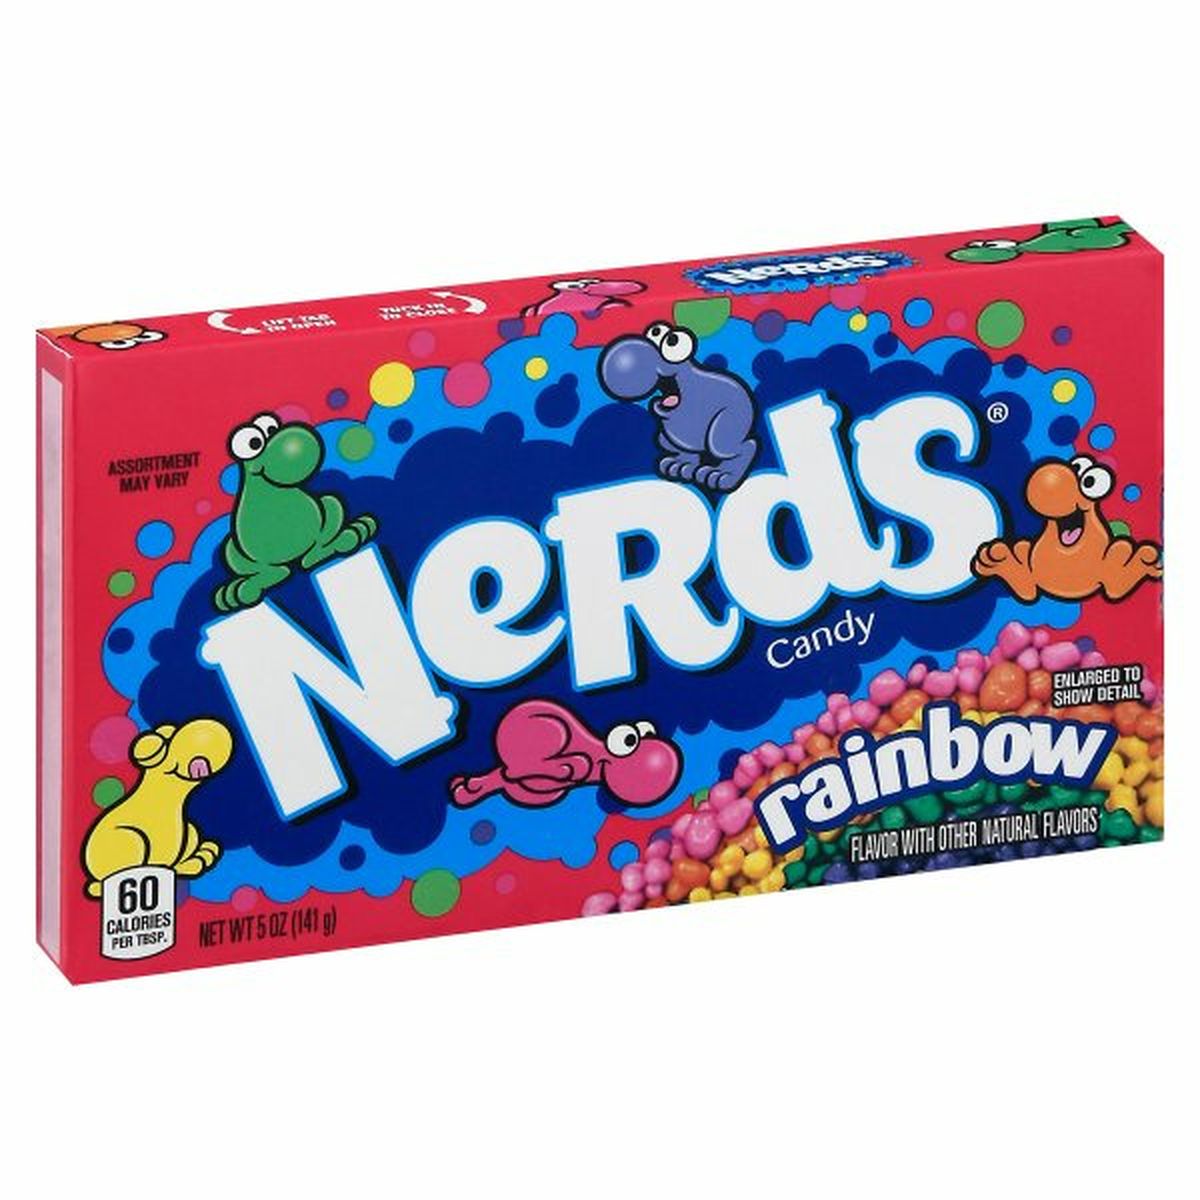 Calories in Nerds Candy, Rainbow